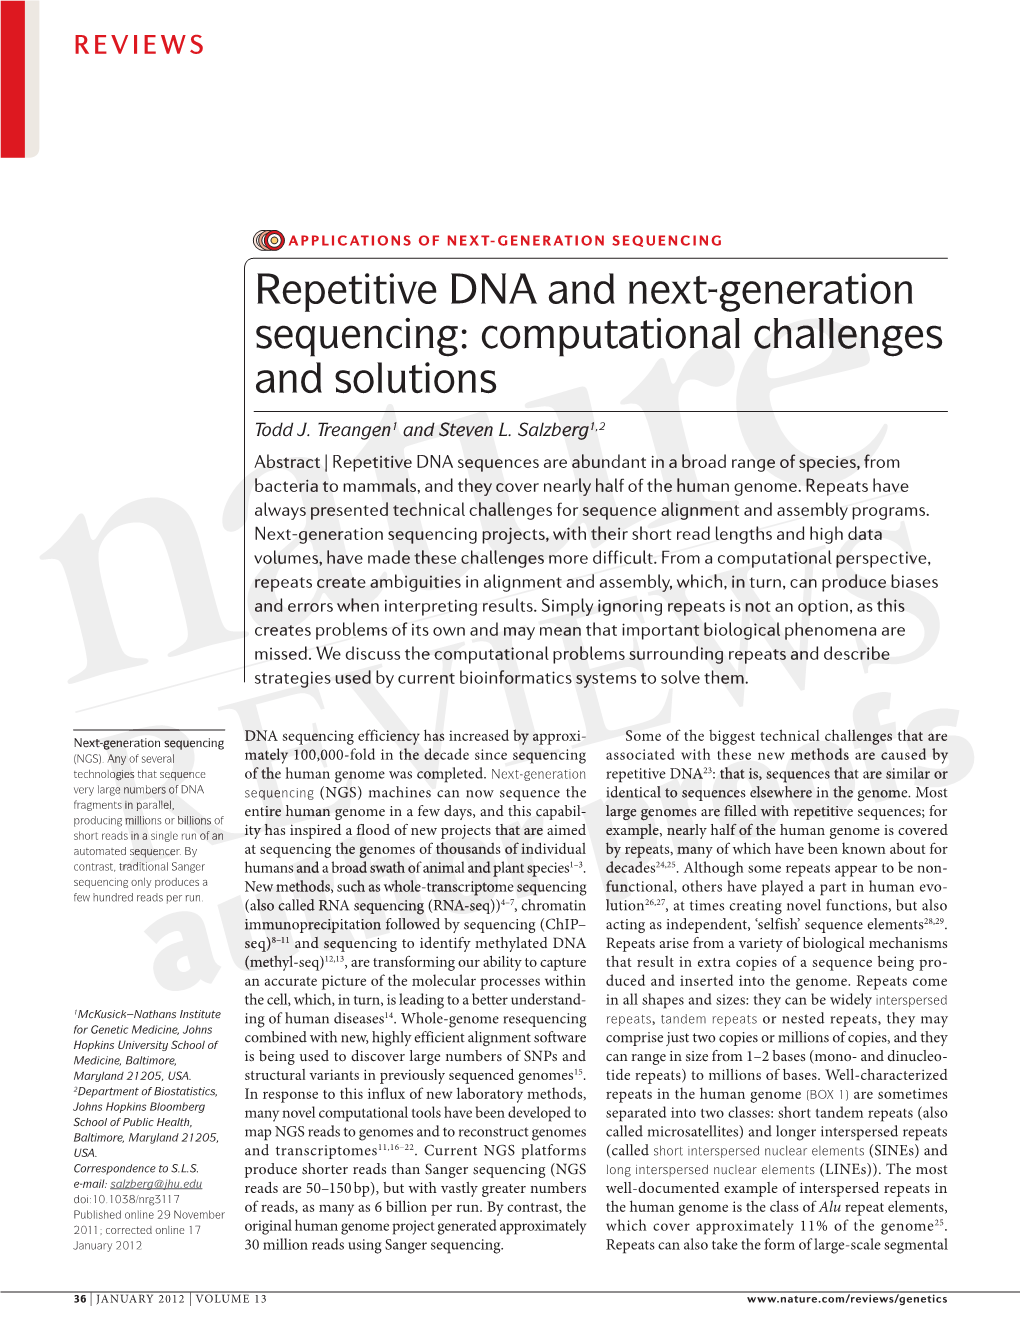 Repetitive DNA and Next-Generation Sequencing: Computational Challenges and Solutions